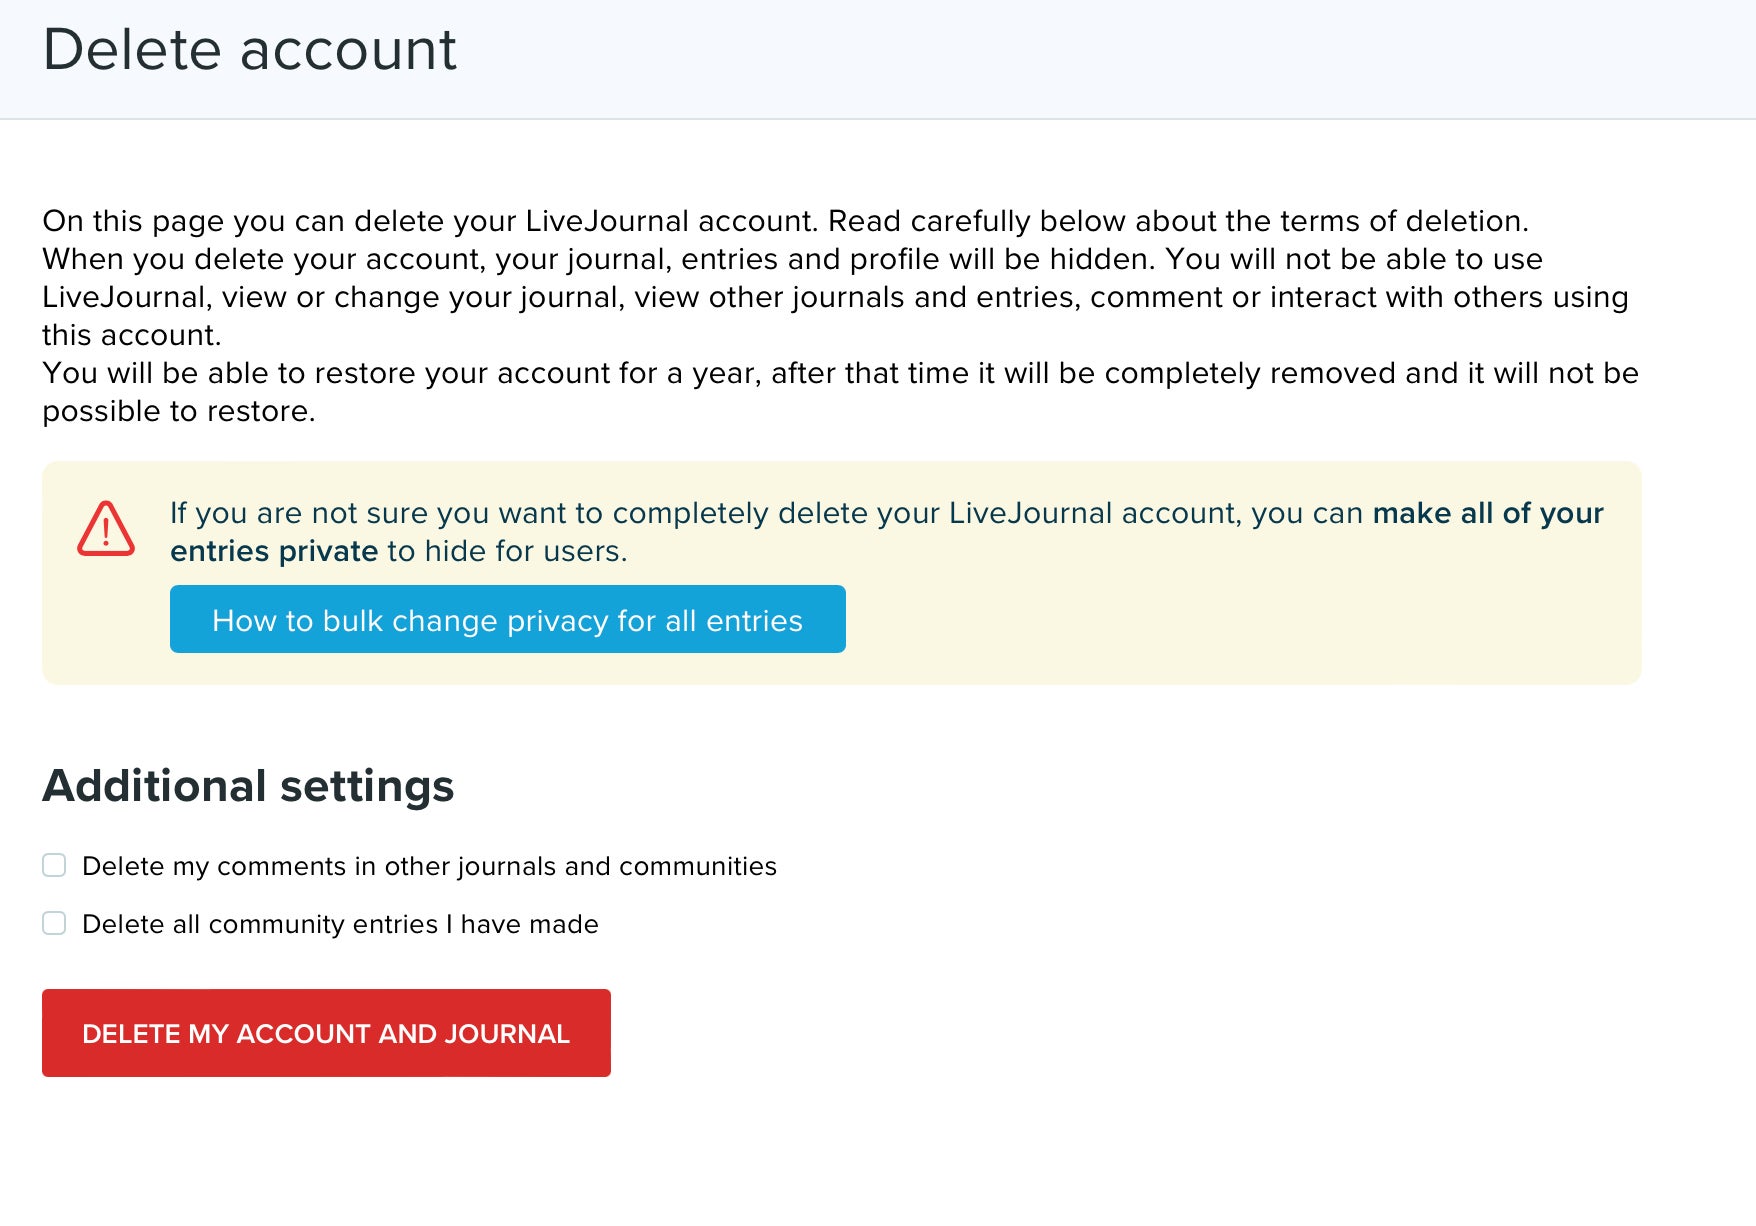 The page where you can delete your LiveJournal account, with additional settings for deleting comments across the site.